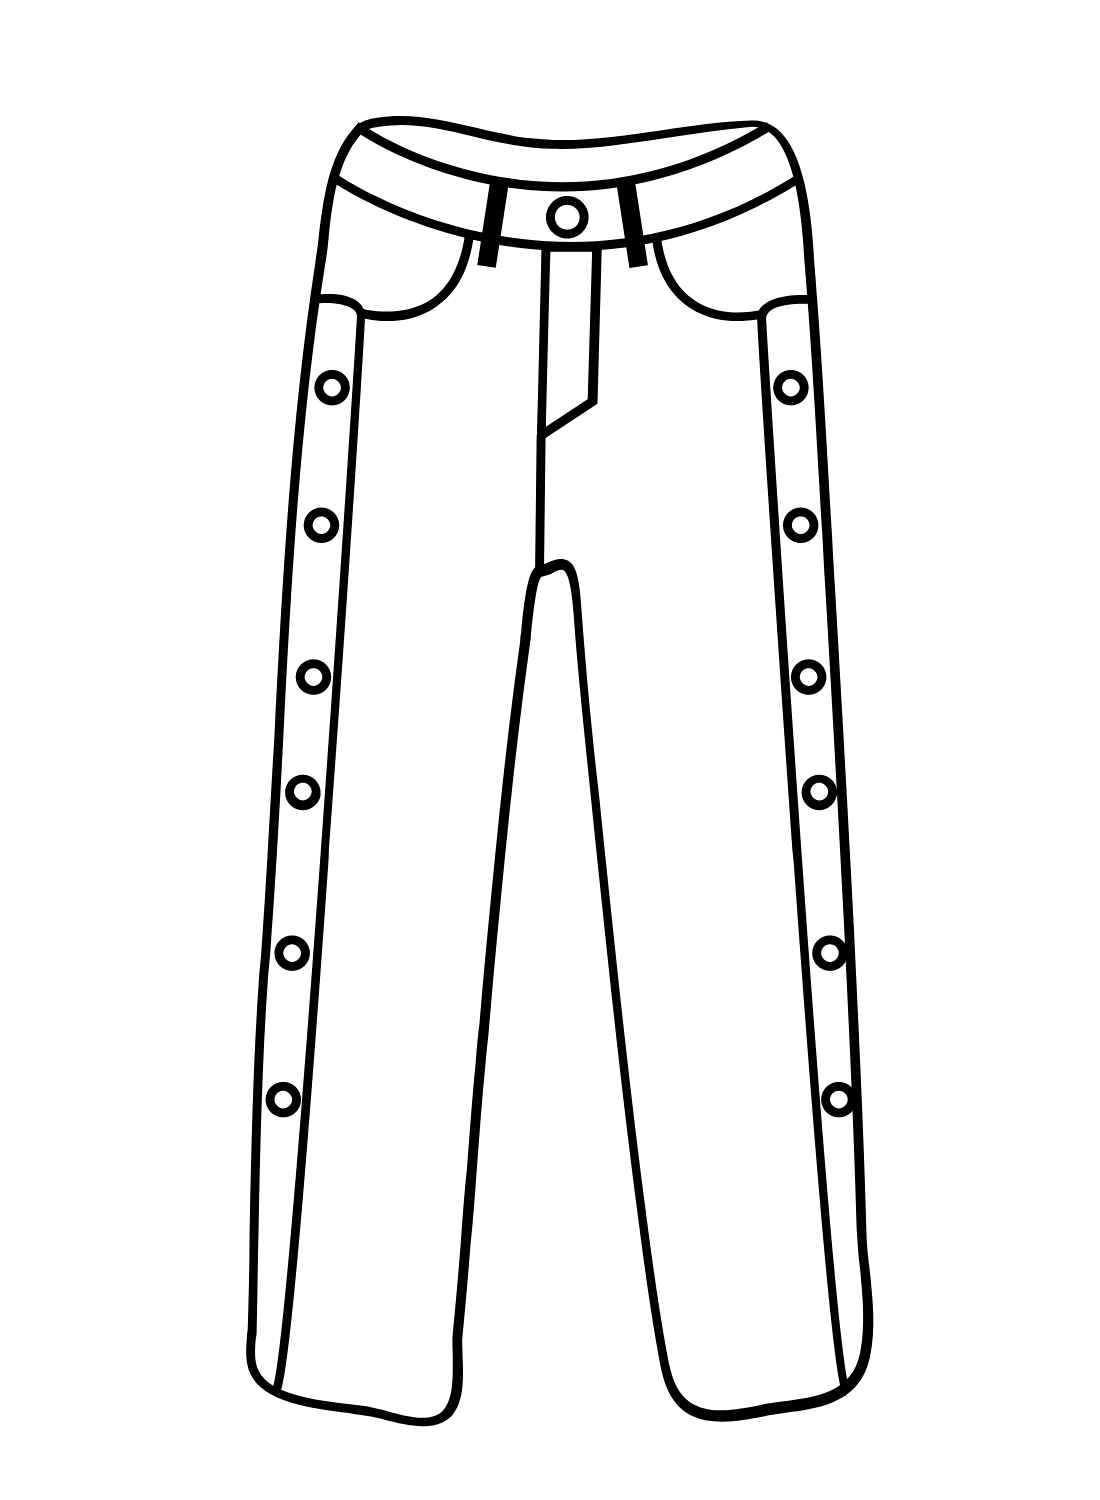 Fashionable Pants Coloring Page